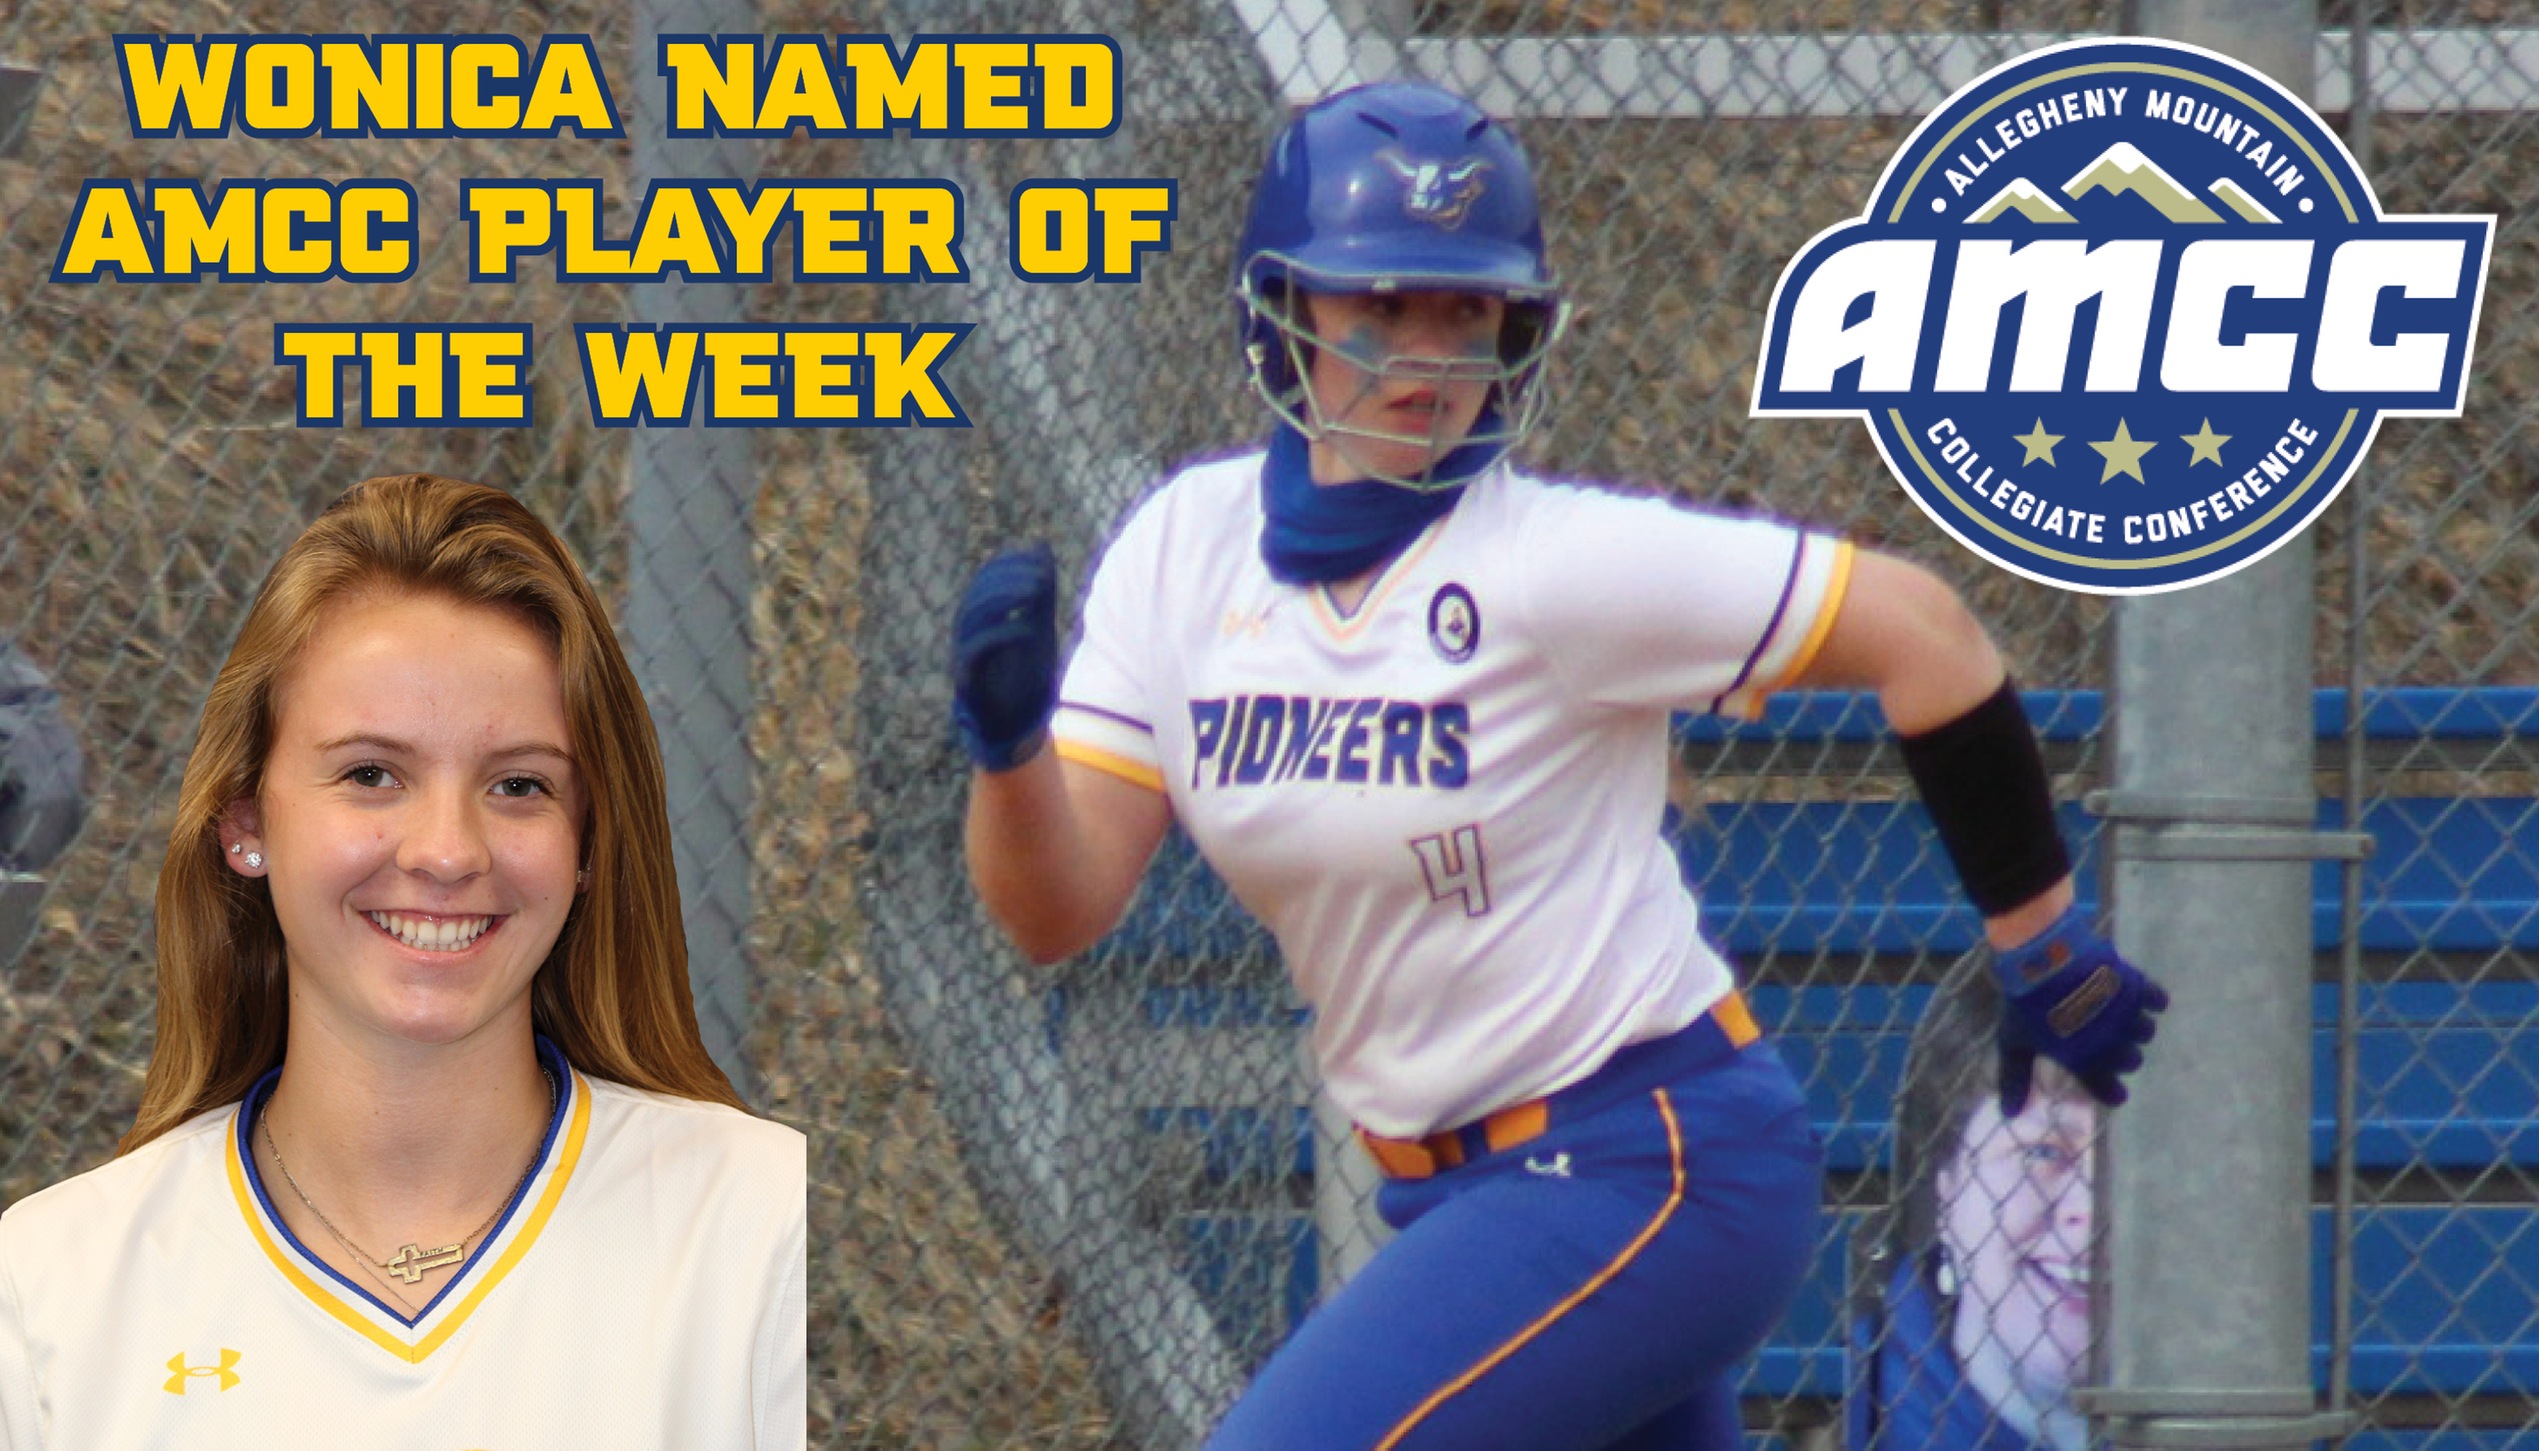 Kailey Wonica named AMCC player of the Week
Pictured - Wonica running down the first base line and a headshot of Wonica.